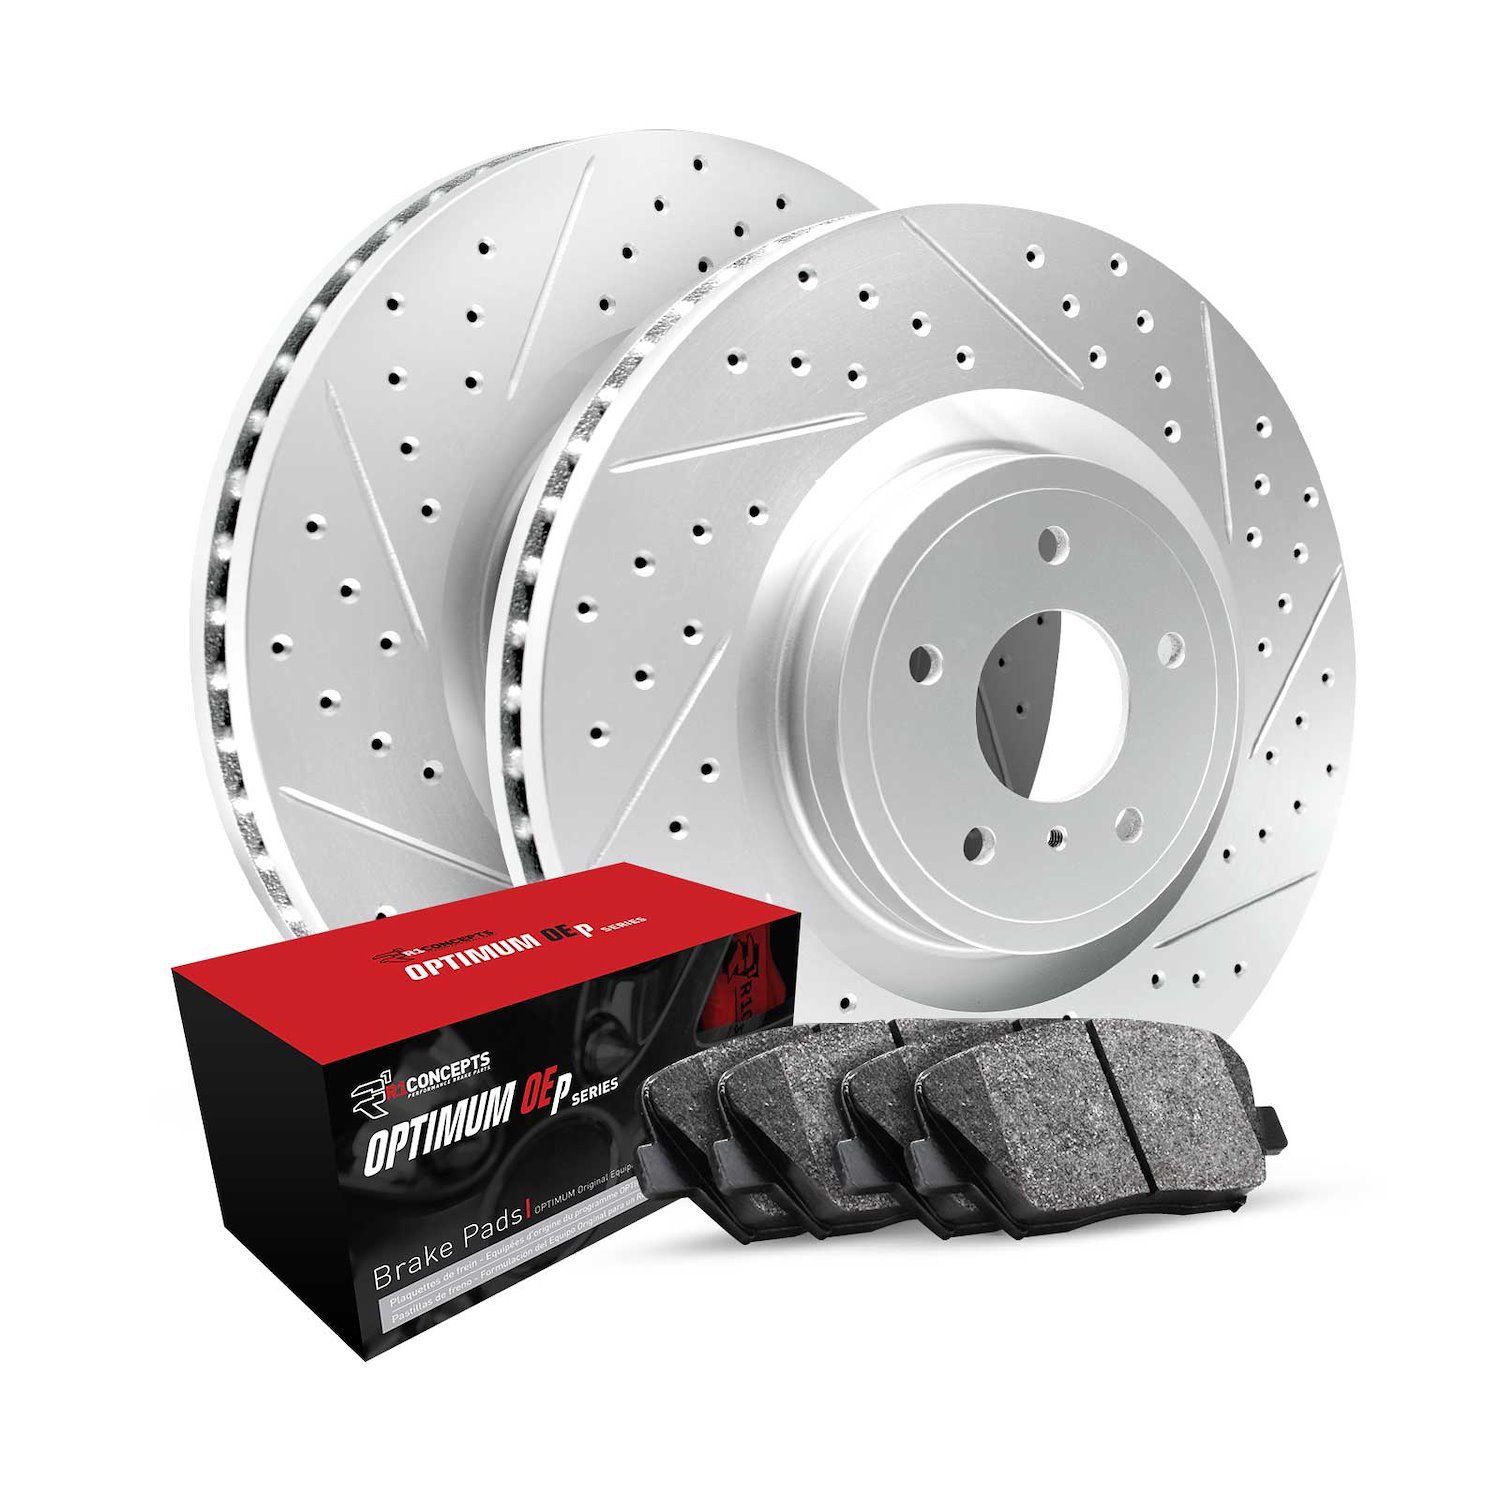 GEO-Carbon Drilled/Slotted Rotors w/Optimum OE Pads, 1991-1996 Acura/Honda, Position: Rear